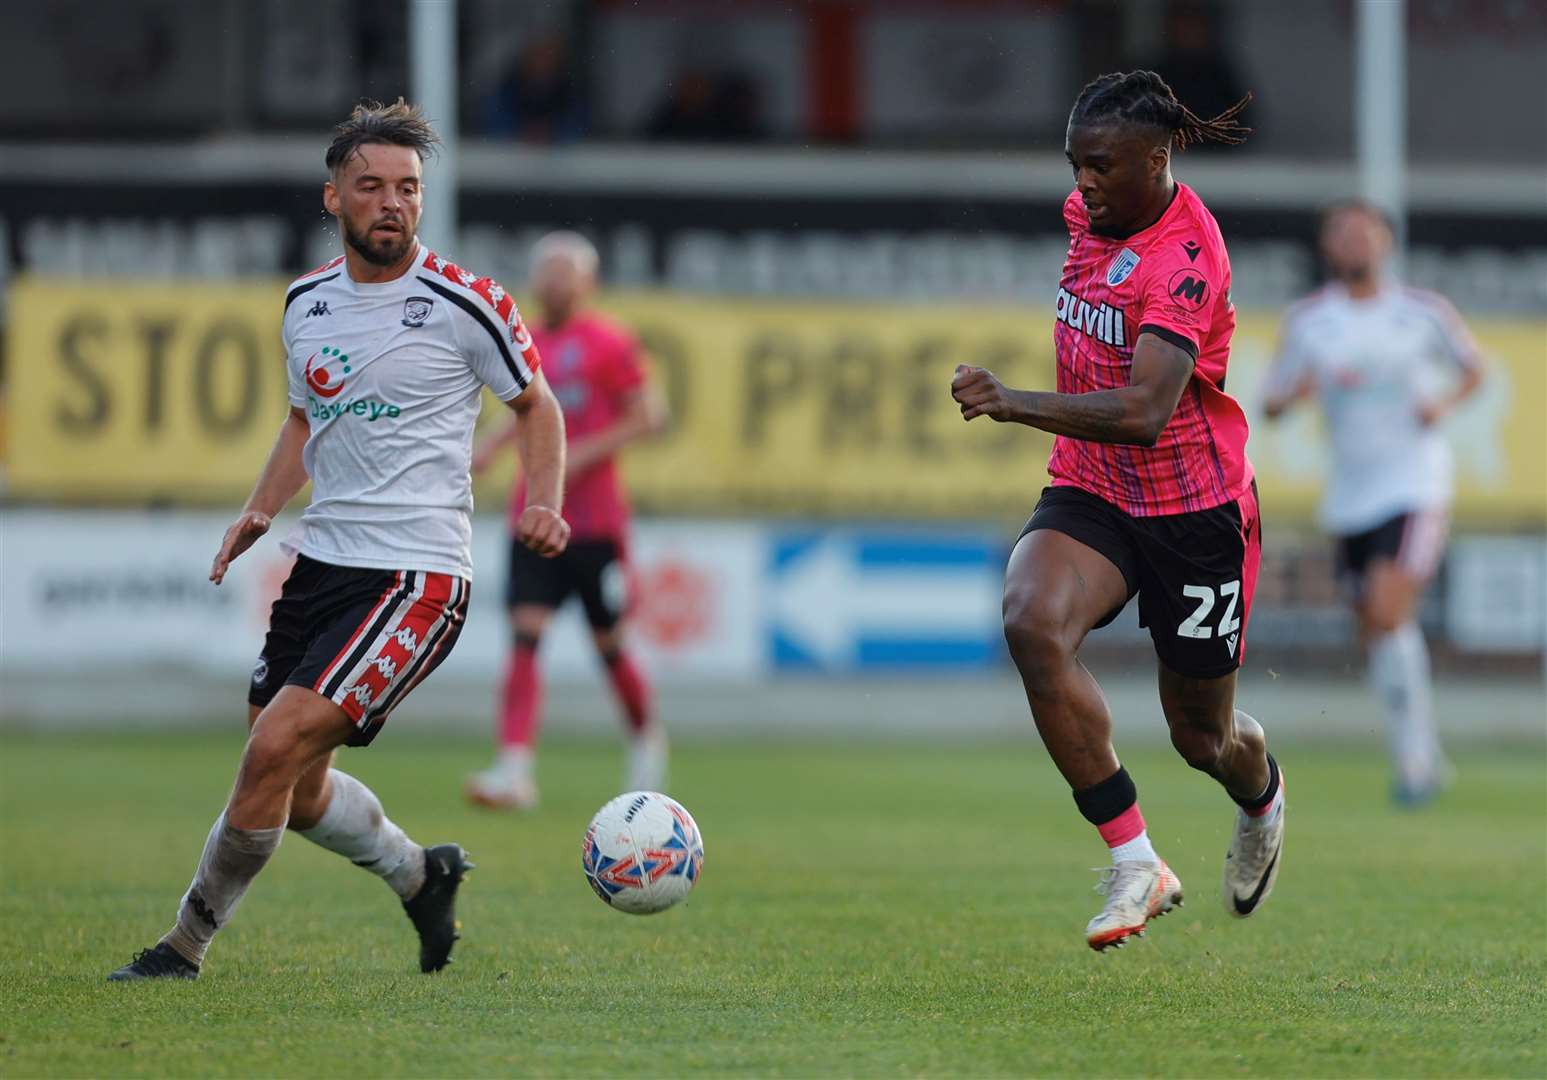 Shad Ogie challenges for the ball for Gillingham at Hereford Picture: @Julian_KPI